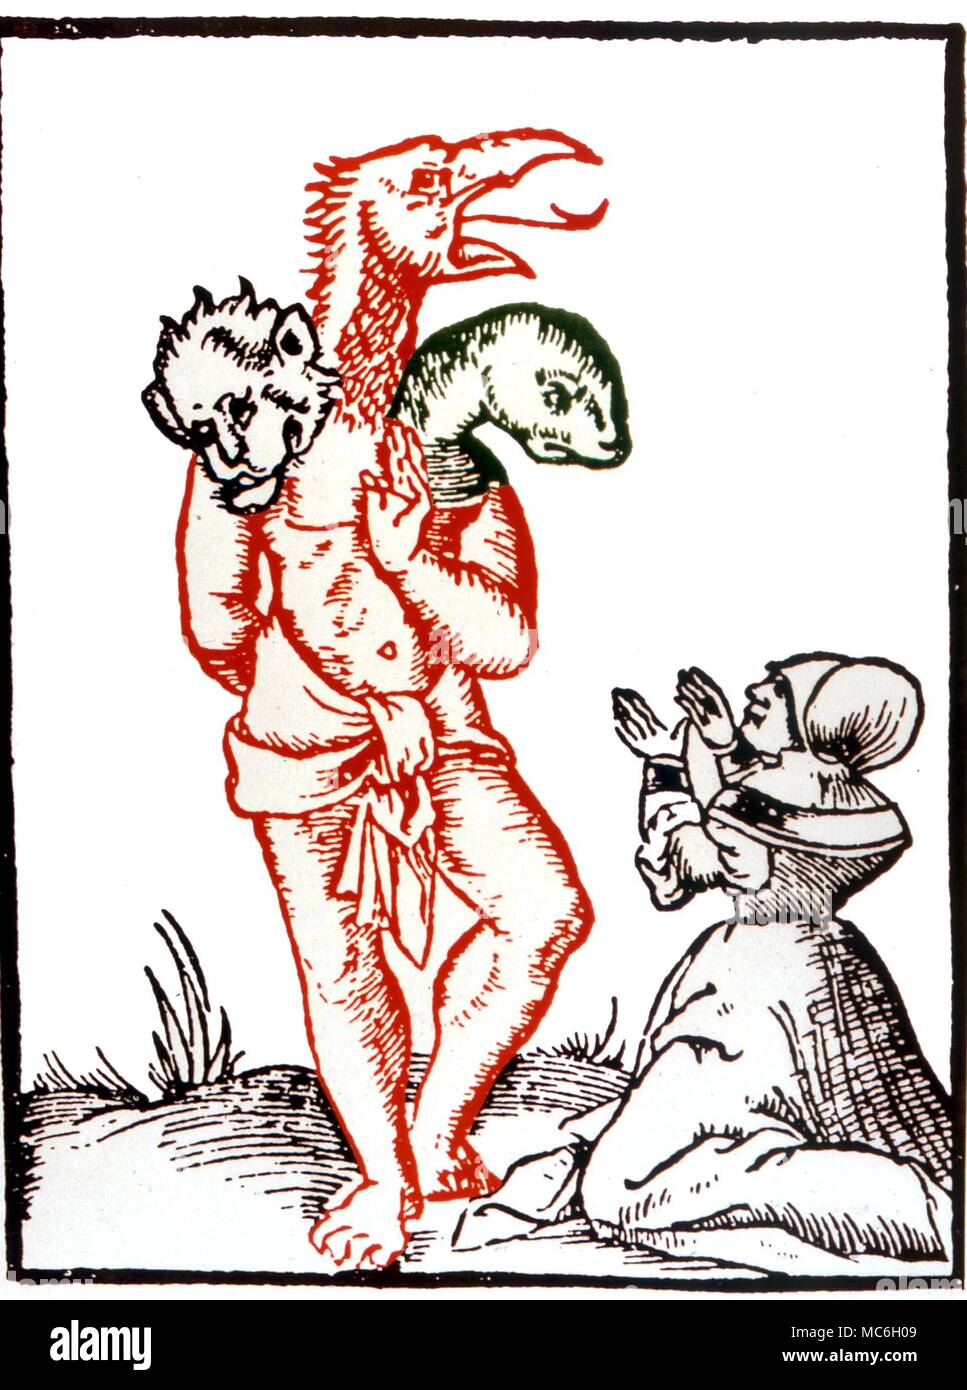 MONSTERS A monster created by a witch before the King of the Franks, Marcomir. After Sebastian Munster's 'Geographia Universalis', 1544 Stock Photo